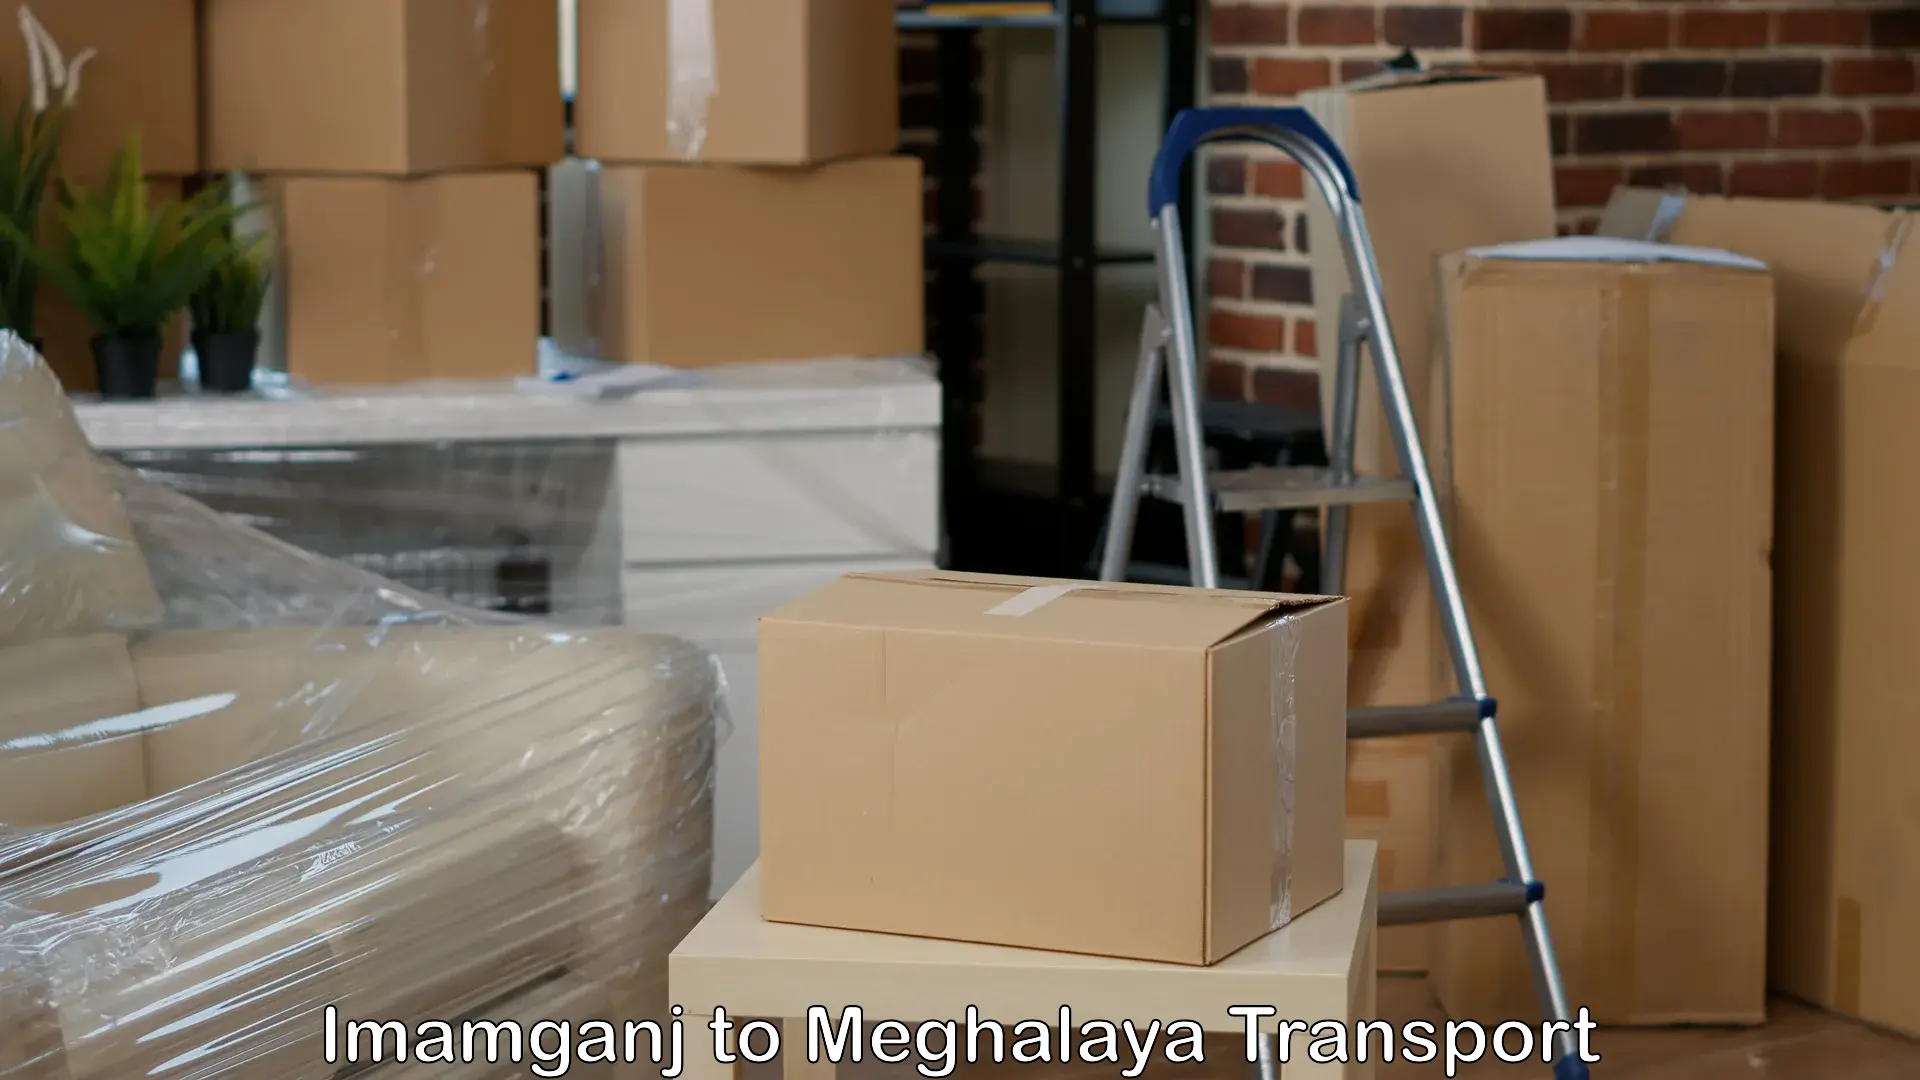 Air cargo transport services in Imamganj to Meghalaya